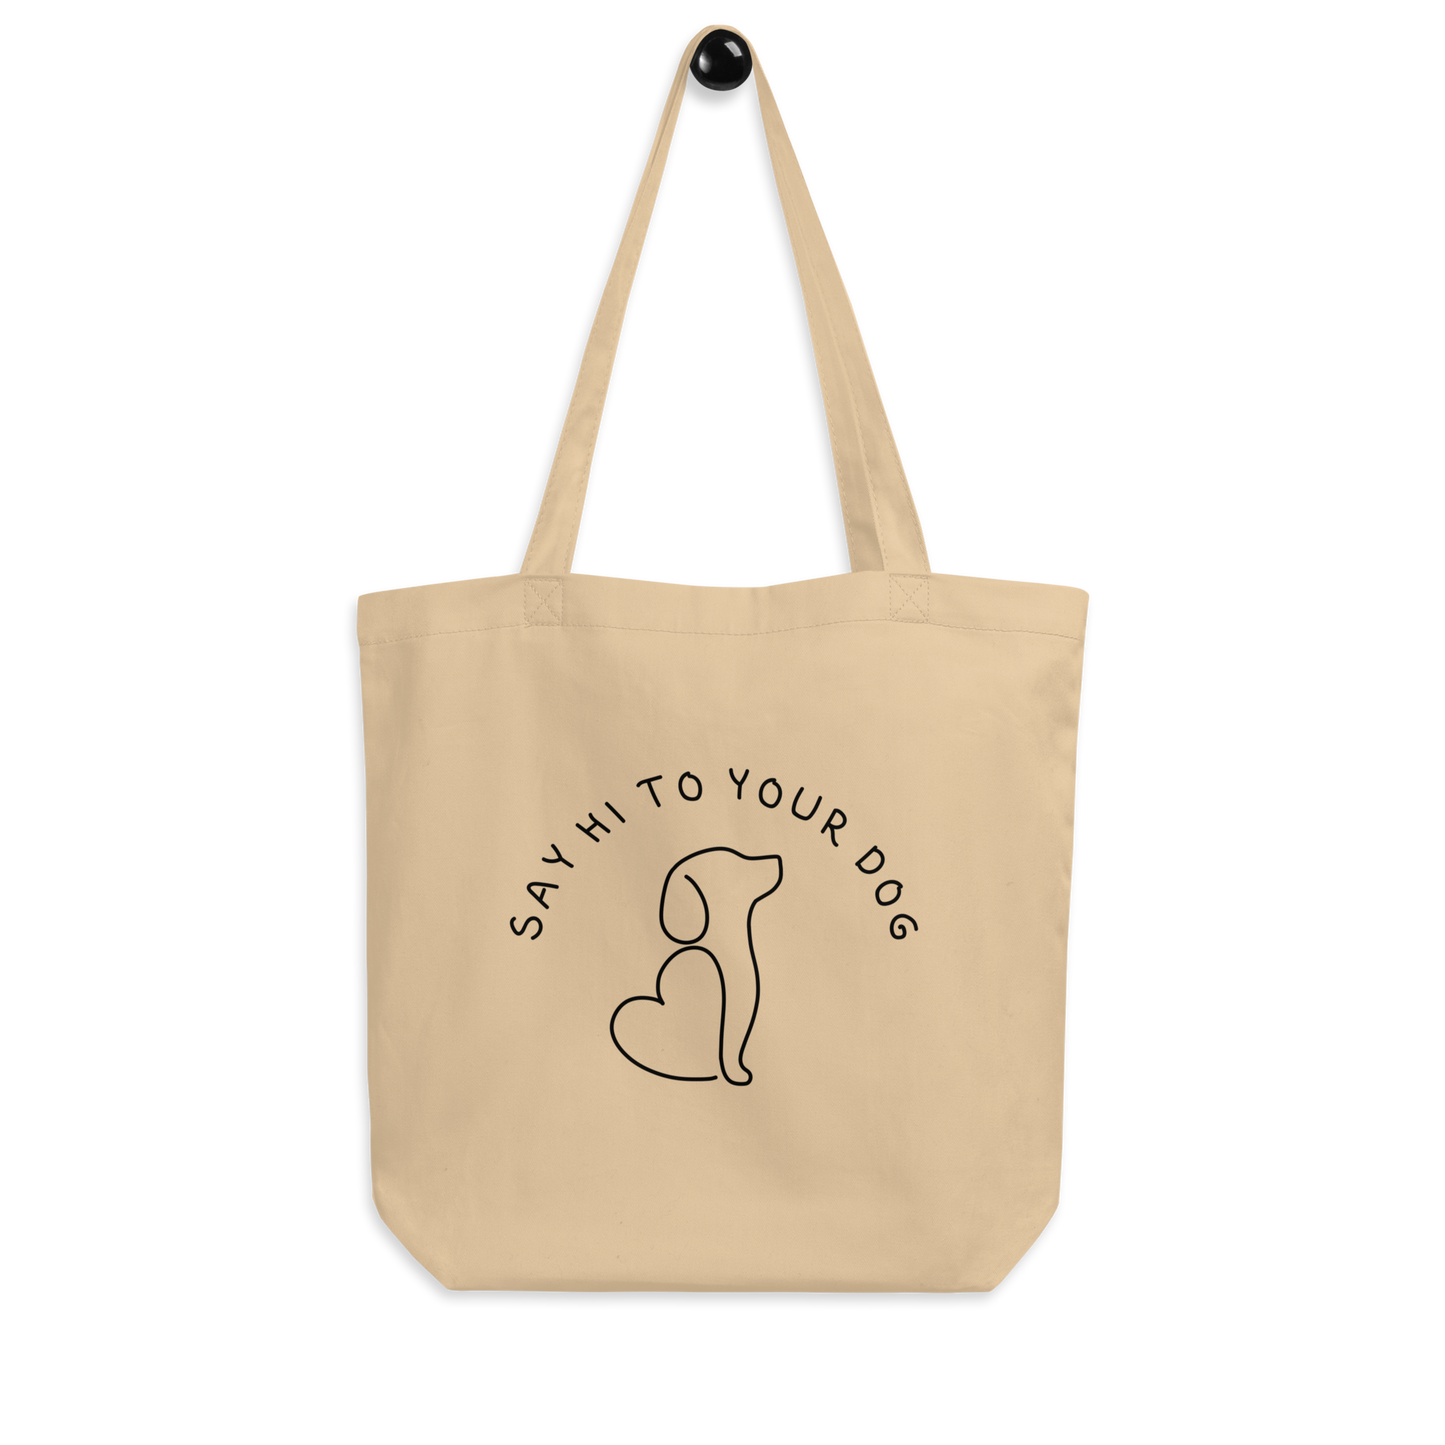 Say Hi to Your Dog Tote